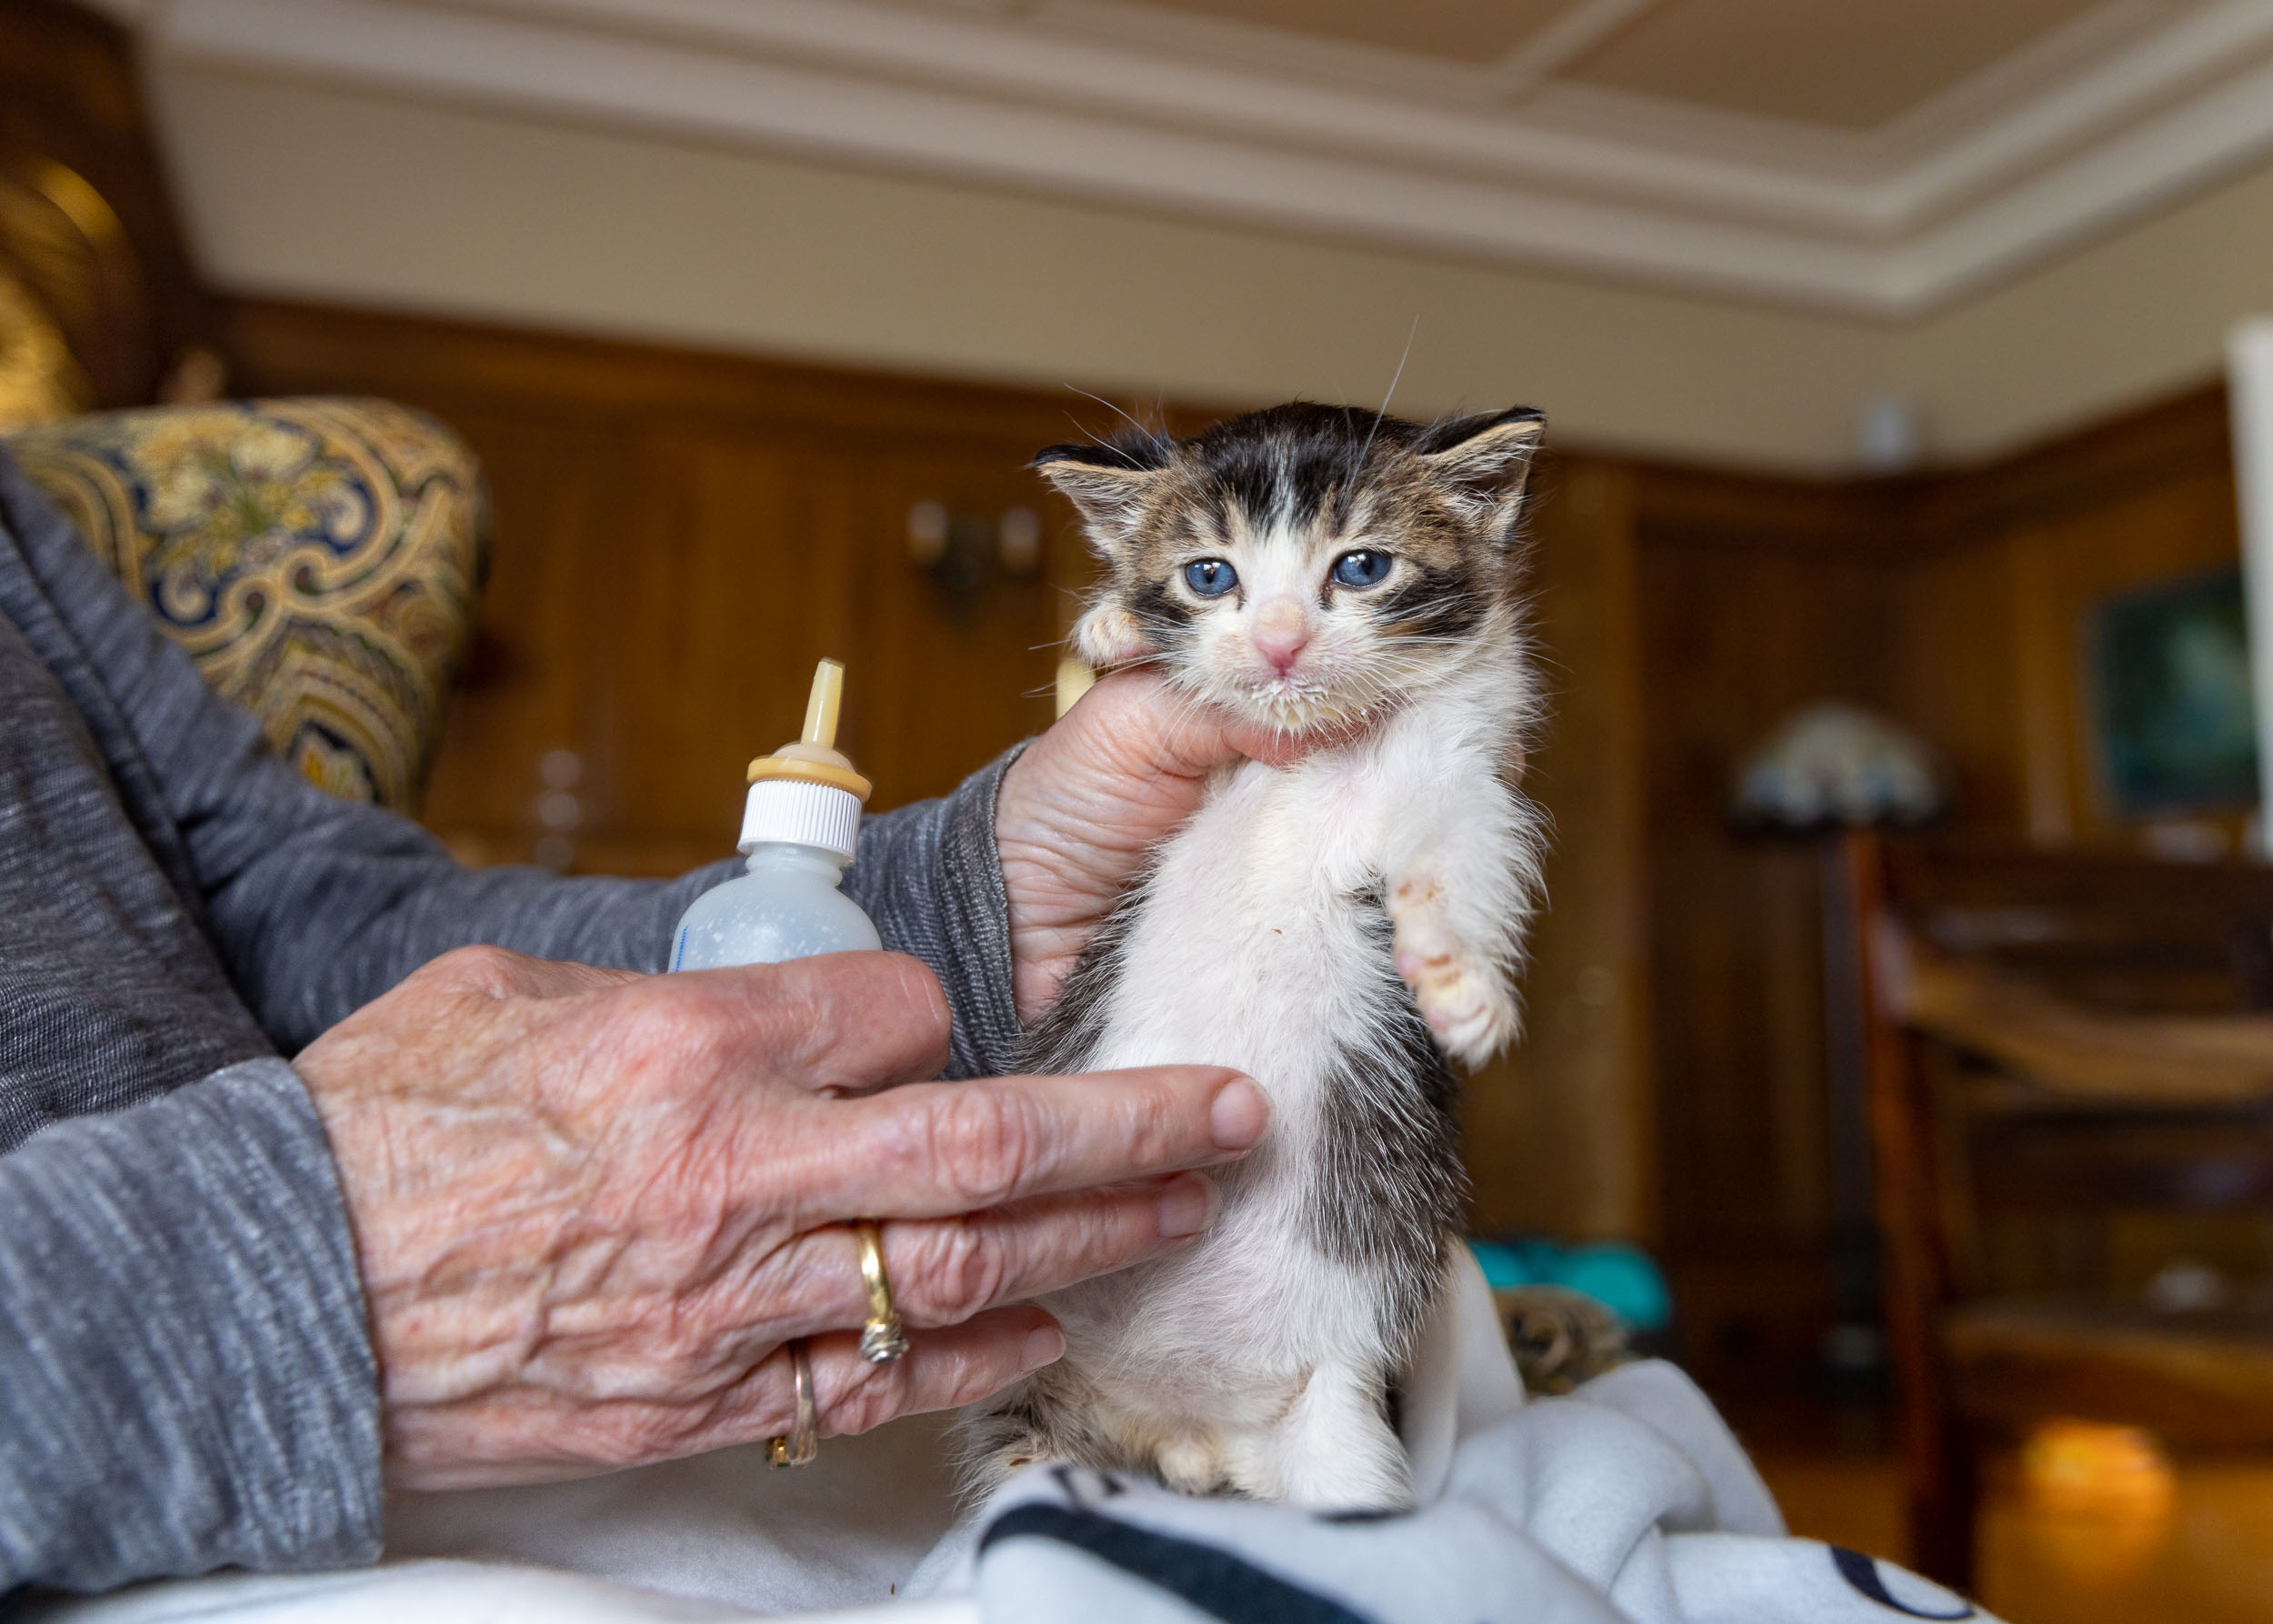 Human-Animal Bond Photography | Young Kitten Held After Feeding